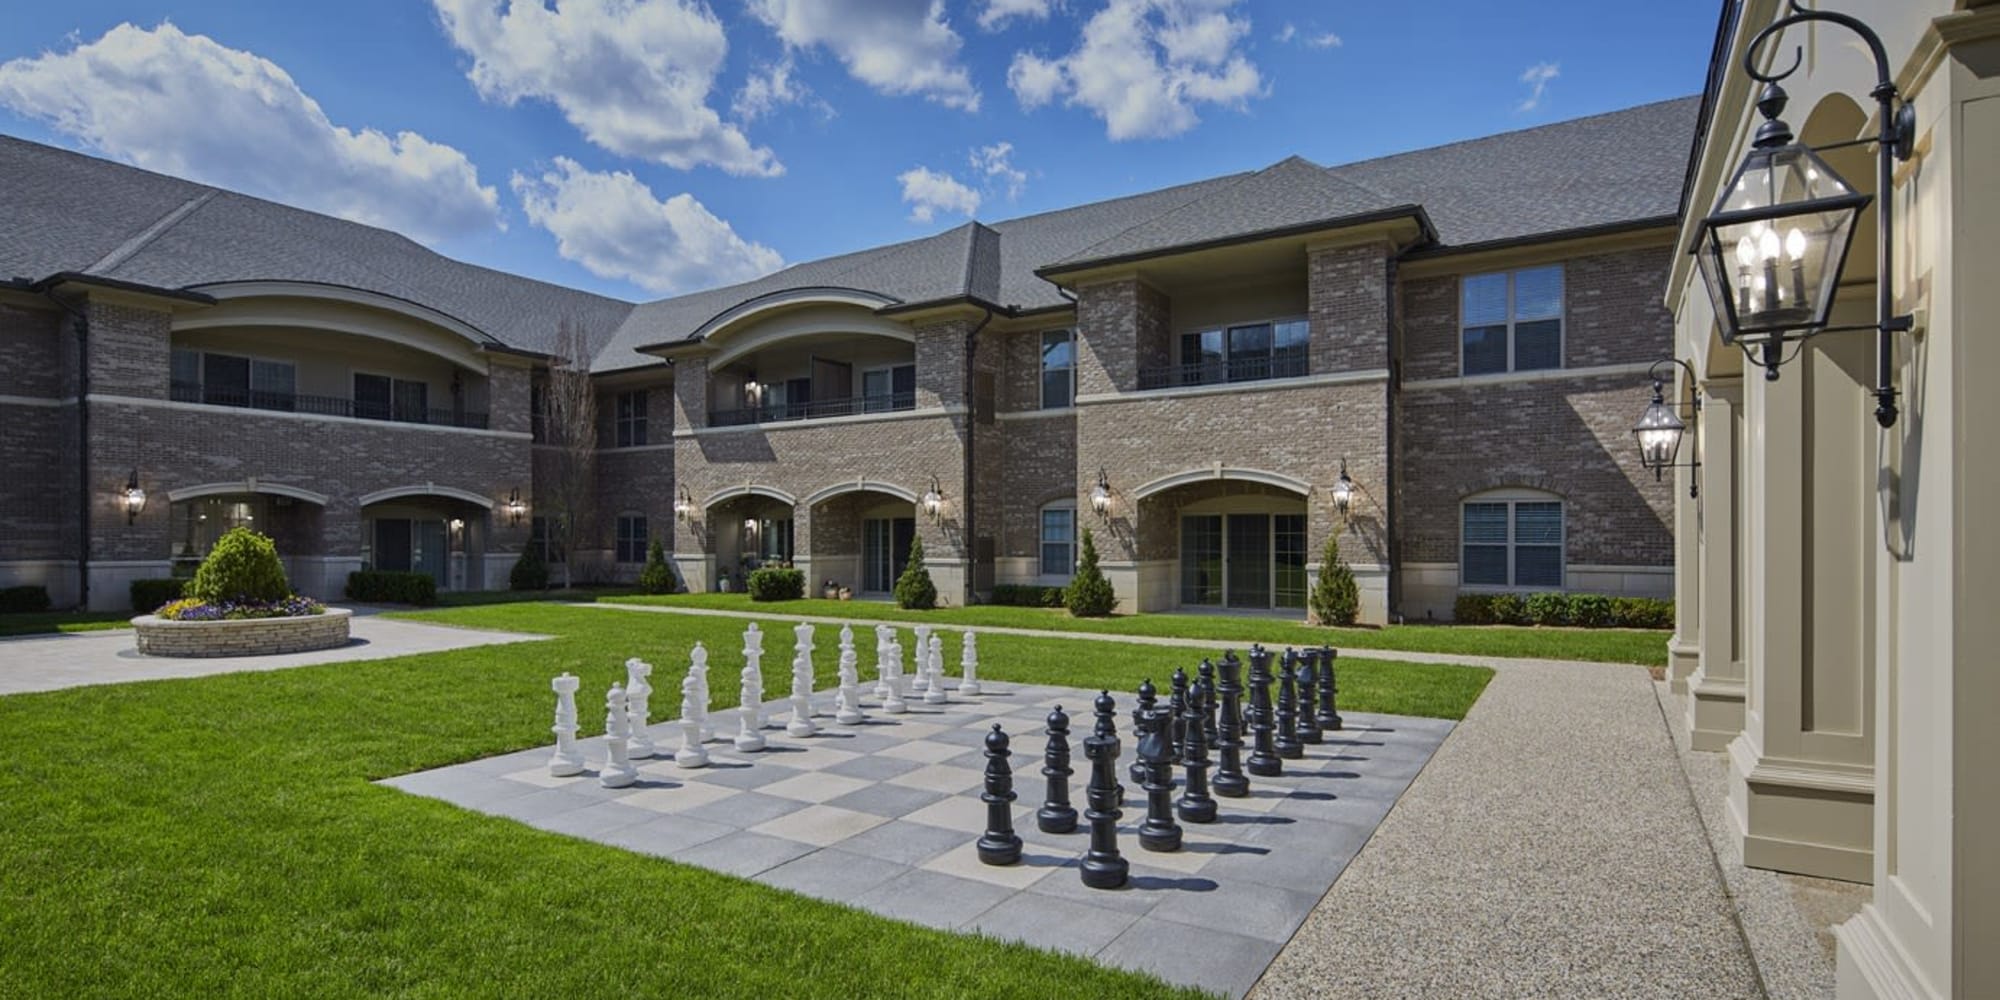 Outdoor courtyard with life size chess board at Blossom Ridge in Oakland Charter Township, Michigan 